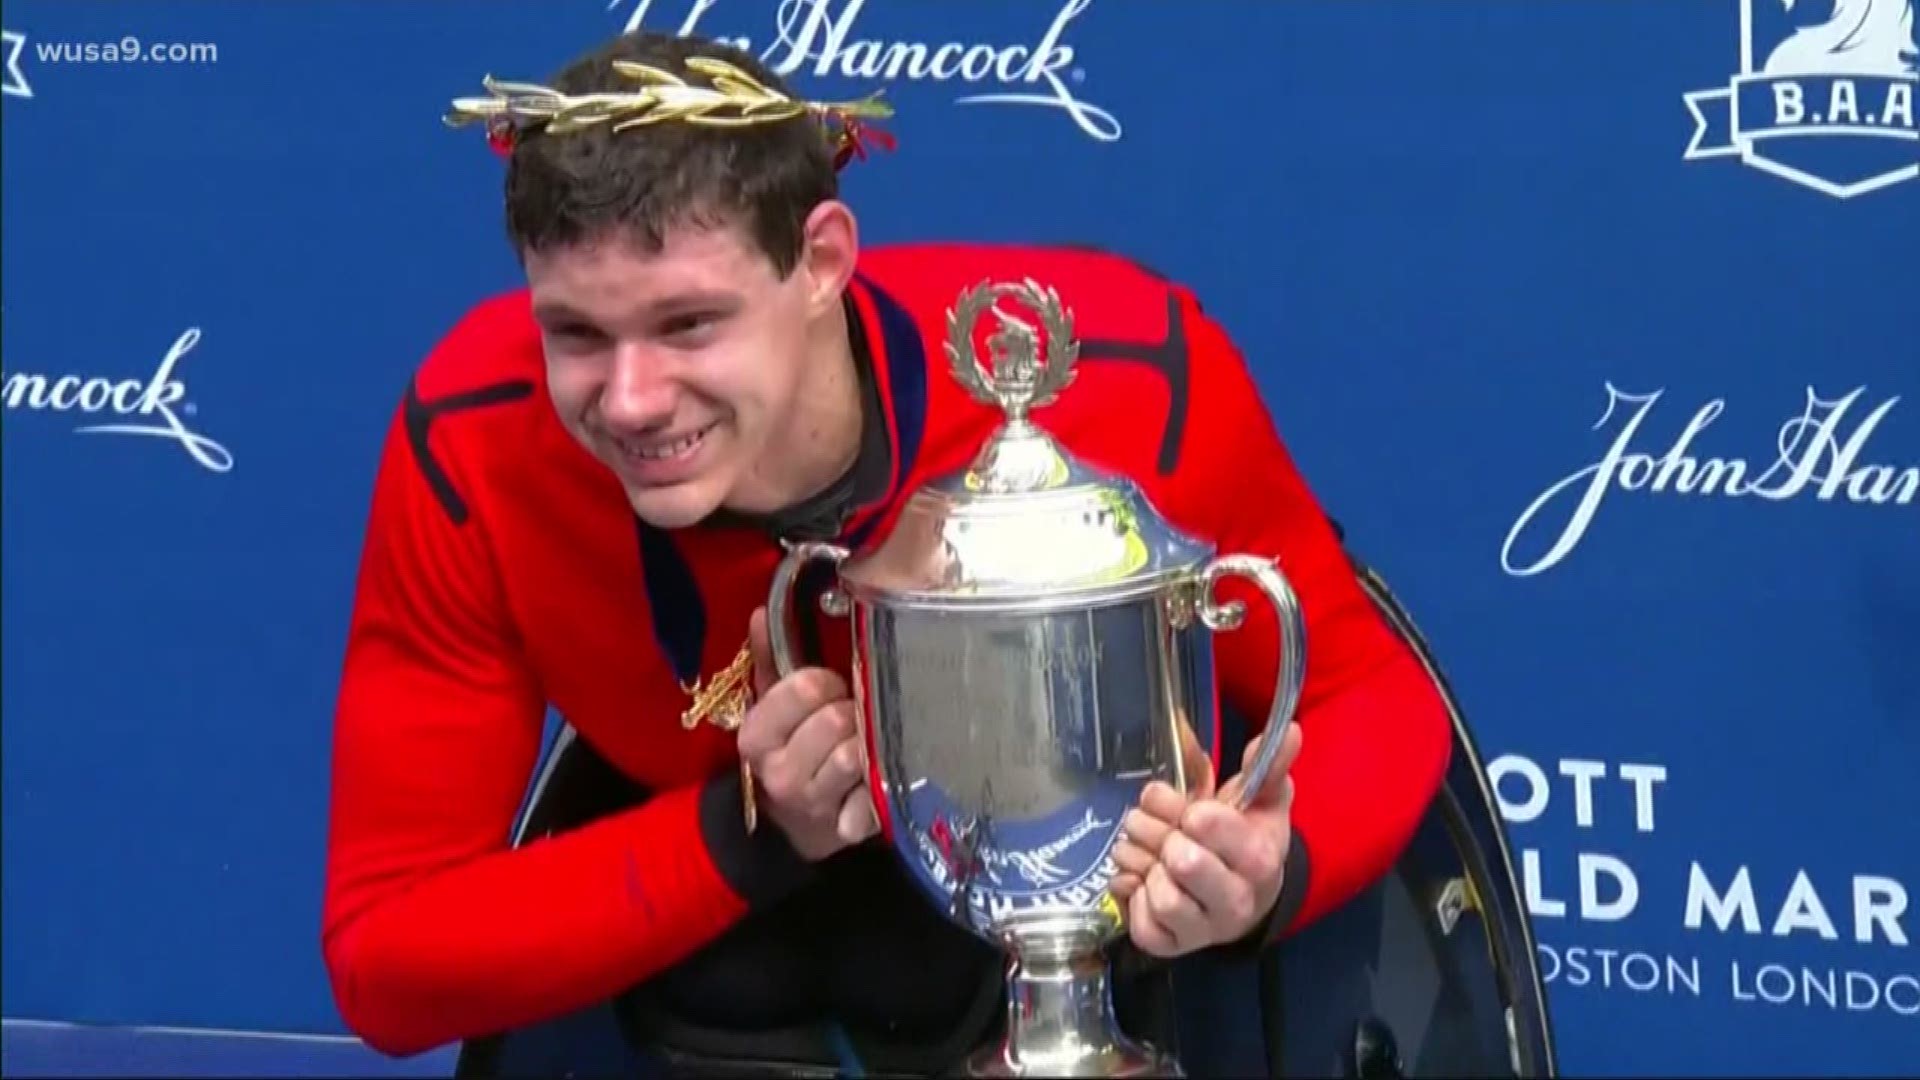 A Maryland man just made history.  He became the first American athlete in 26 years to win the men's wheelchair division at the Boston Marathon.